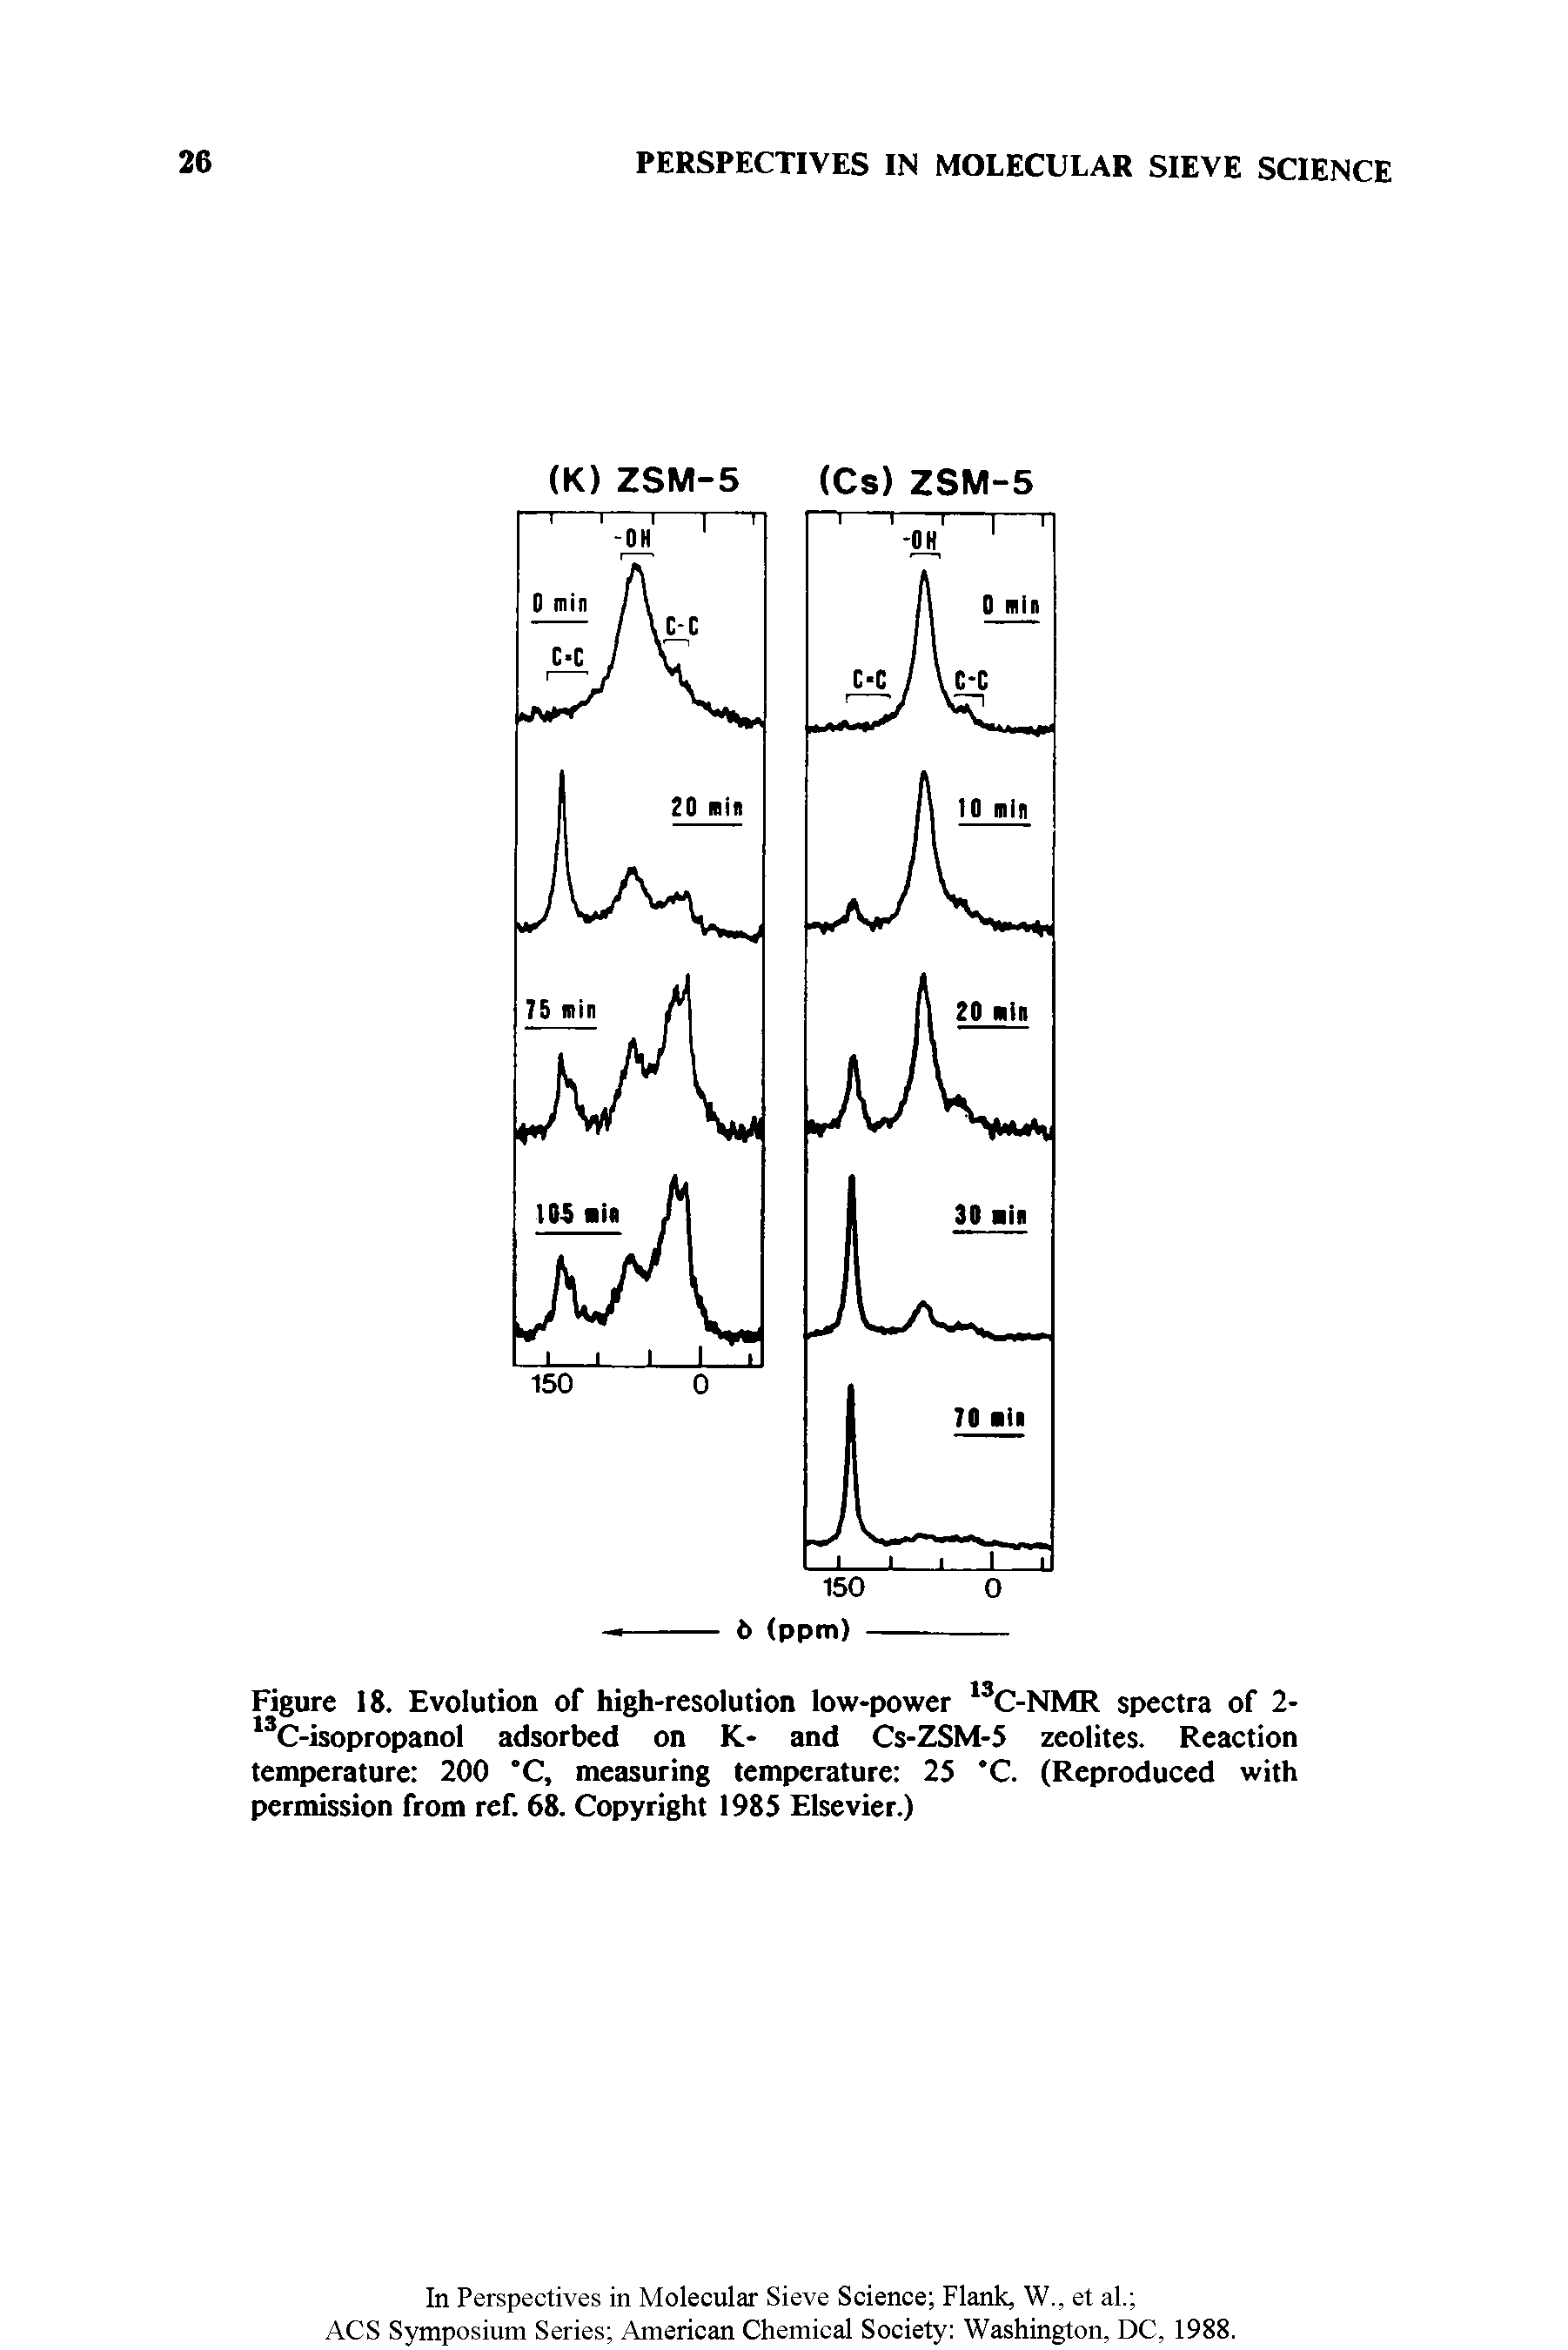 Figure 18. Evolution of high-resolution low-power 13C-NMR spectra of 2-13C-isopropanol adsorbed on K- and Cs-ZSM-5 zeolites. Reaction temperature 200 "C, measuring temperature 25 C. (Reproduced with permission from ref. 68. Copyright 1985 Elsevier.)...